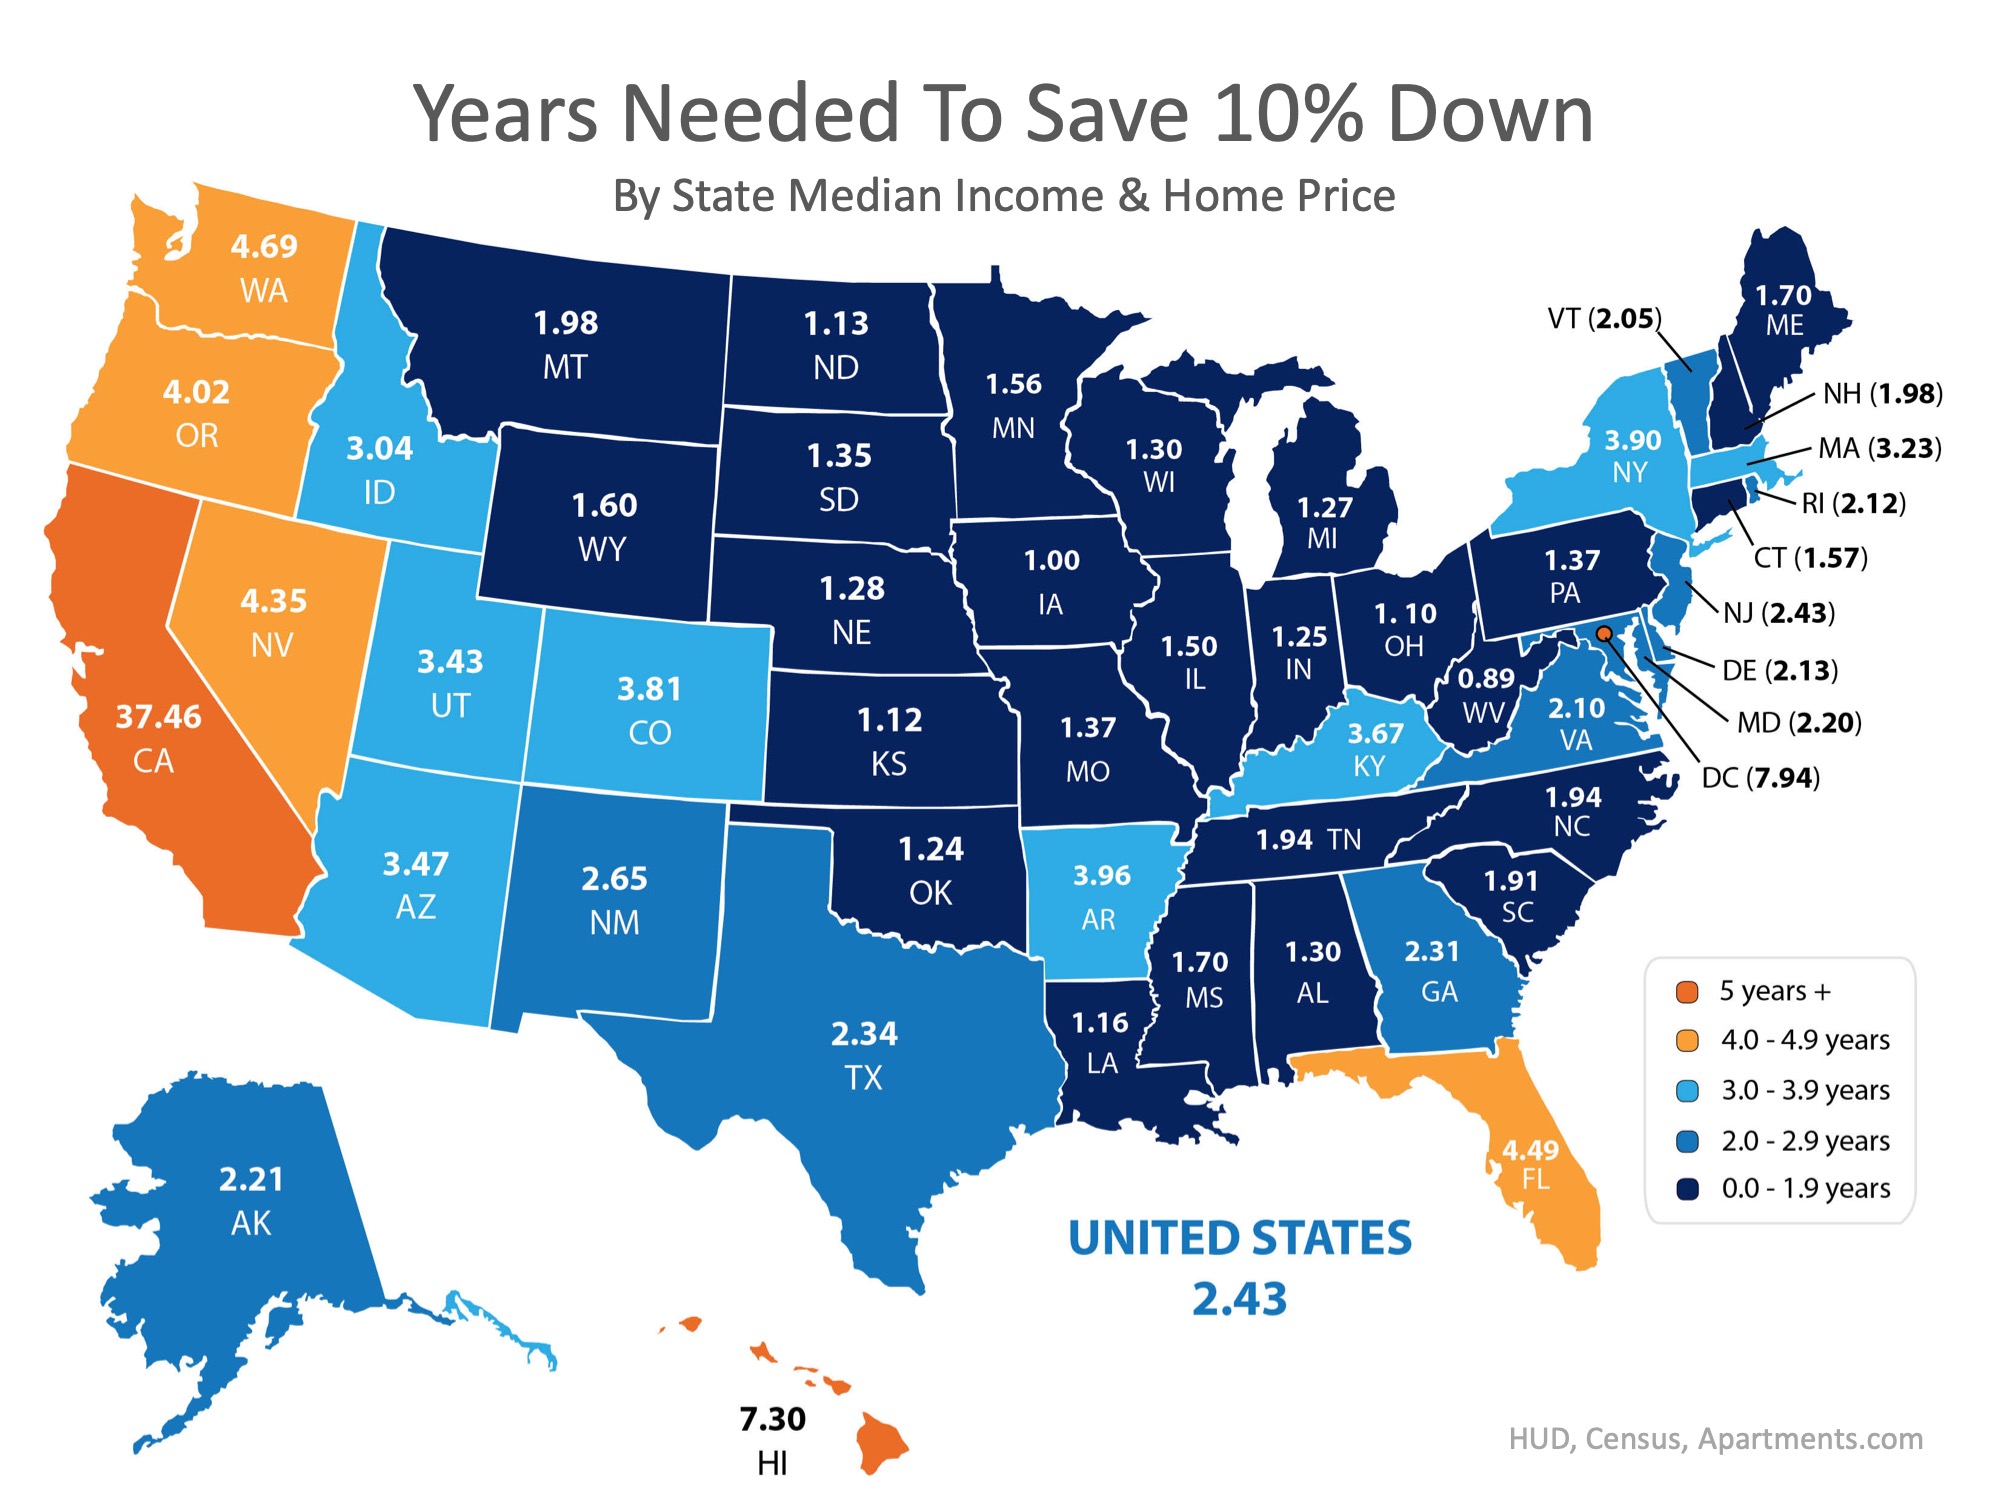 How Quickly Can You Save Your Down Payment? | Simplifying The Market